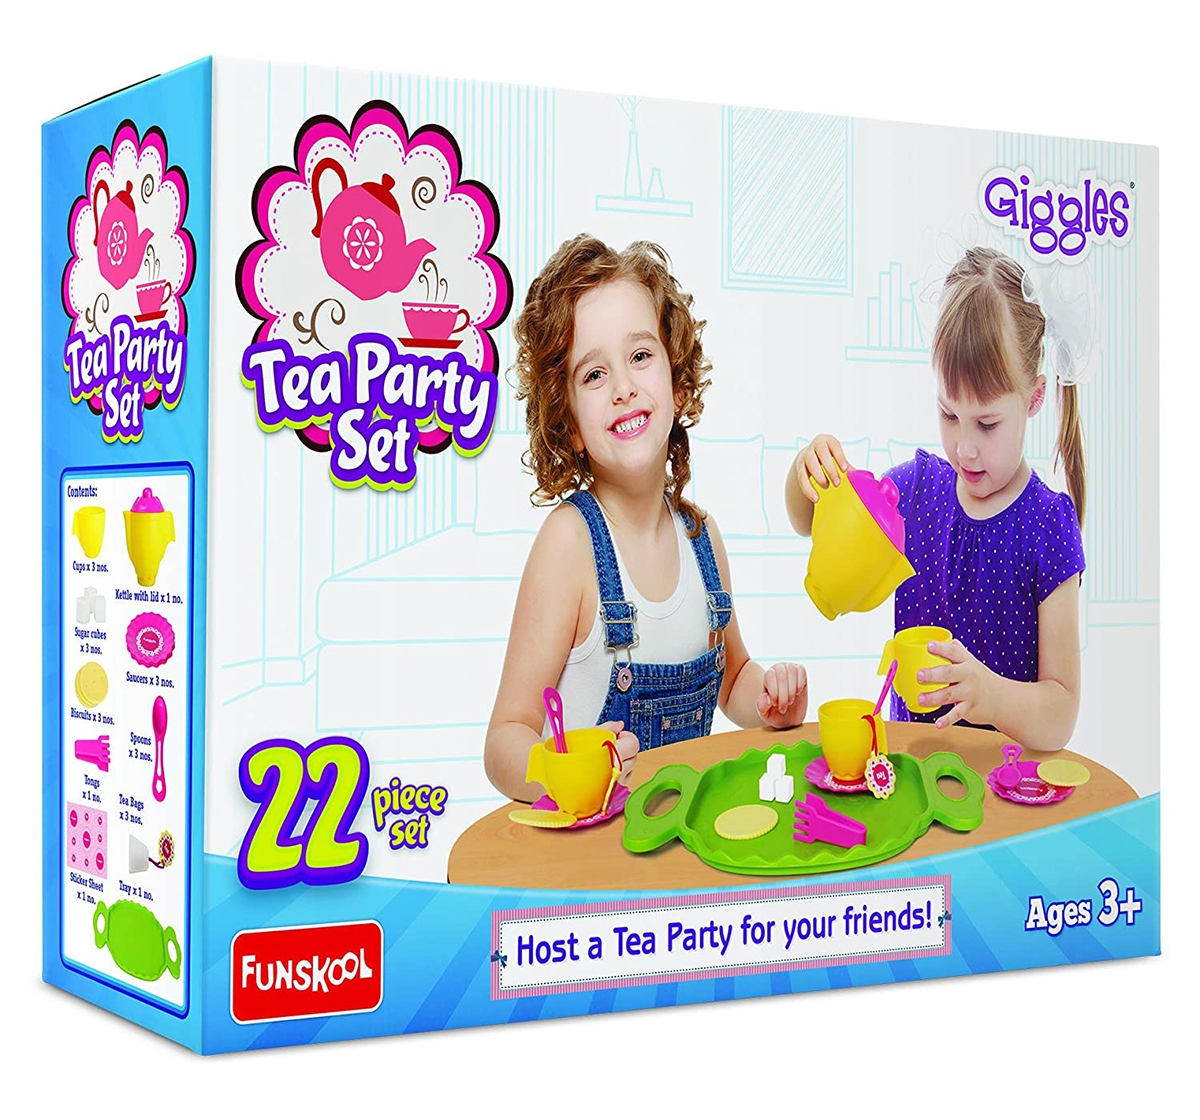 Giggles Tea Party Kitchen Sets & Appliances for Girls age 3Y+ 